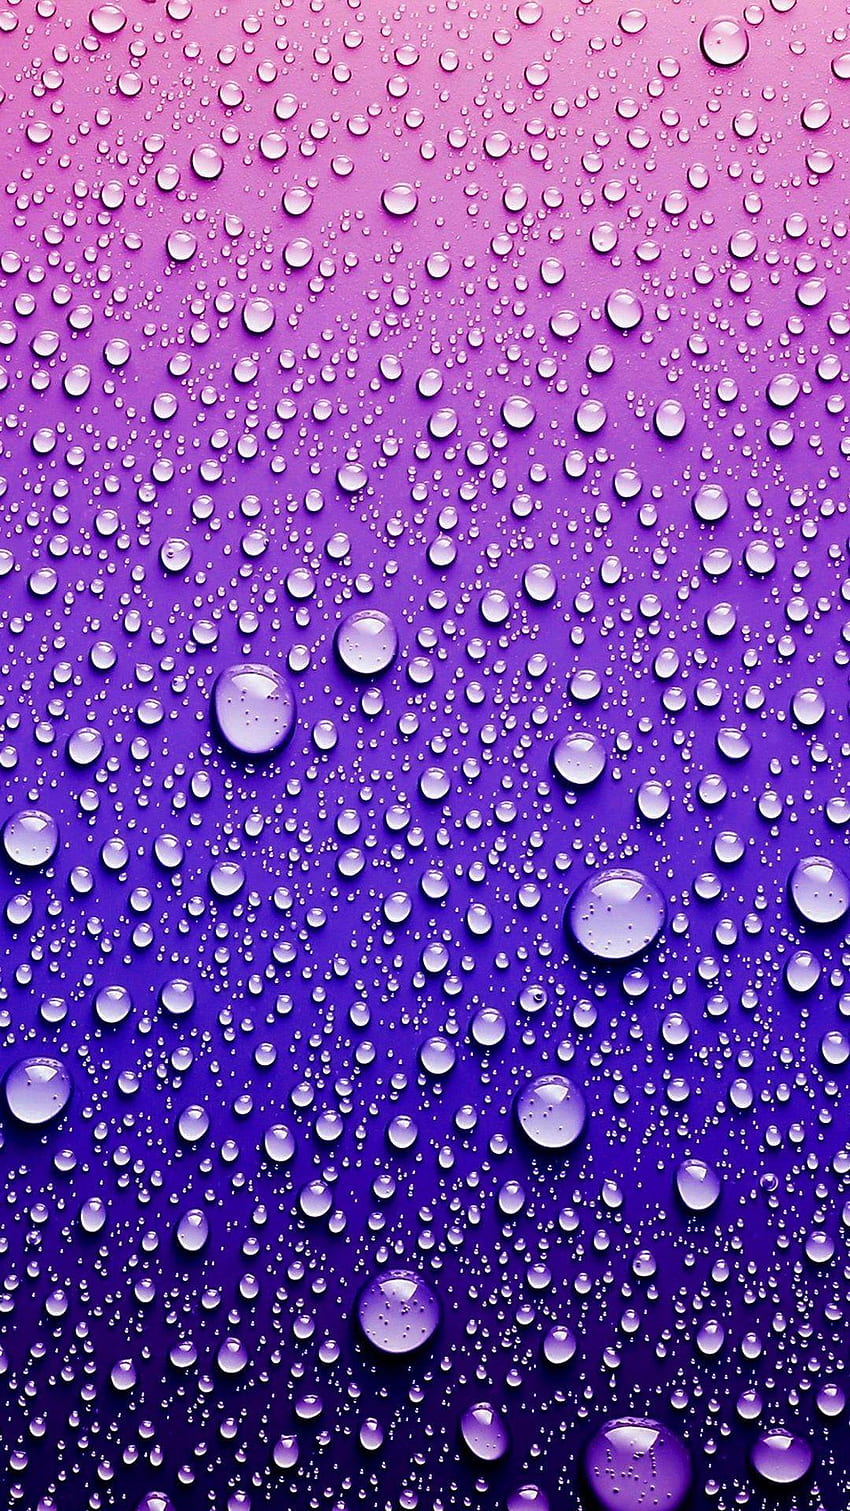 Raindrops for Android, Colorful Raindrop HD phone wallpaper